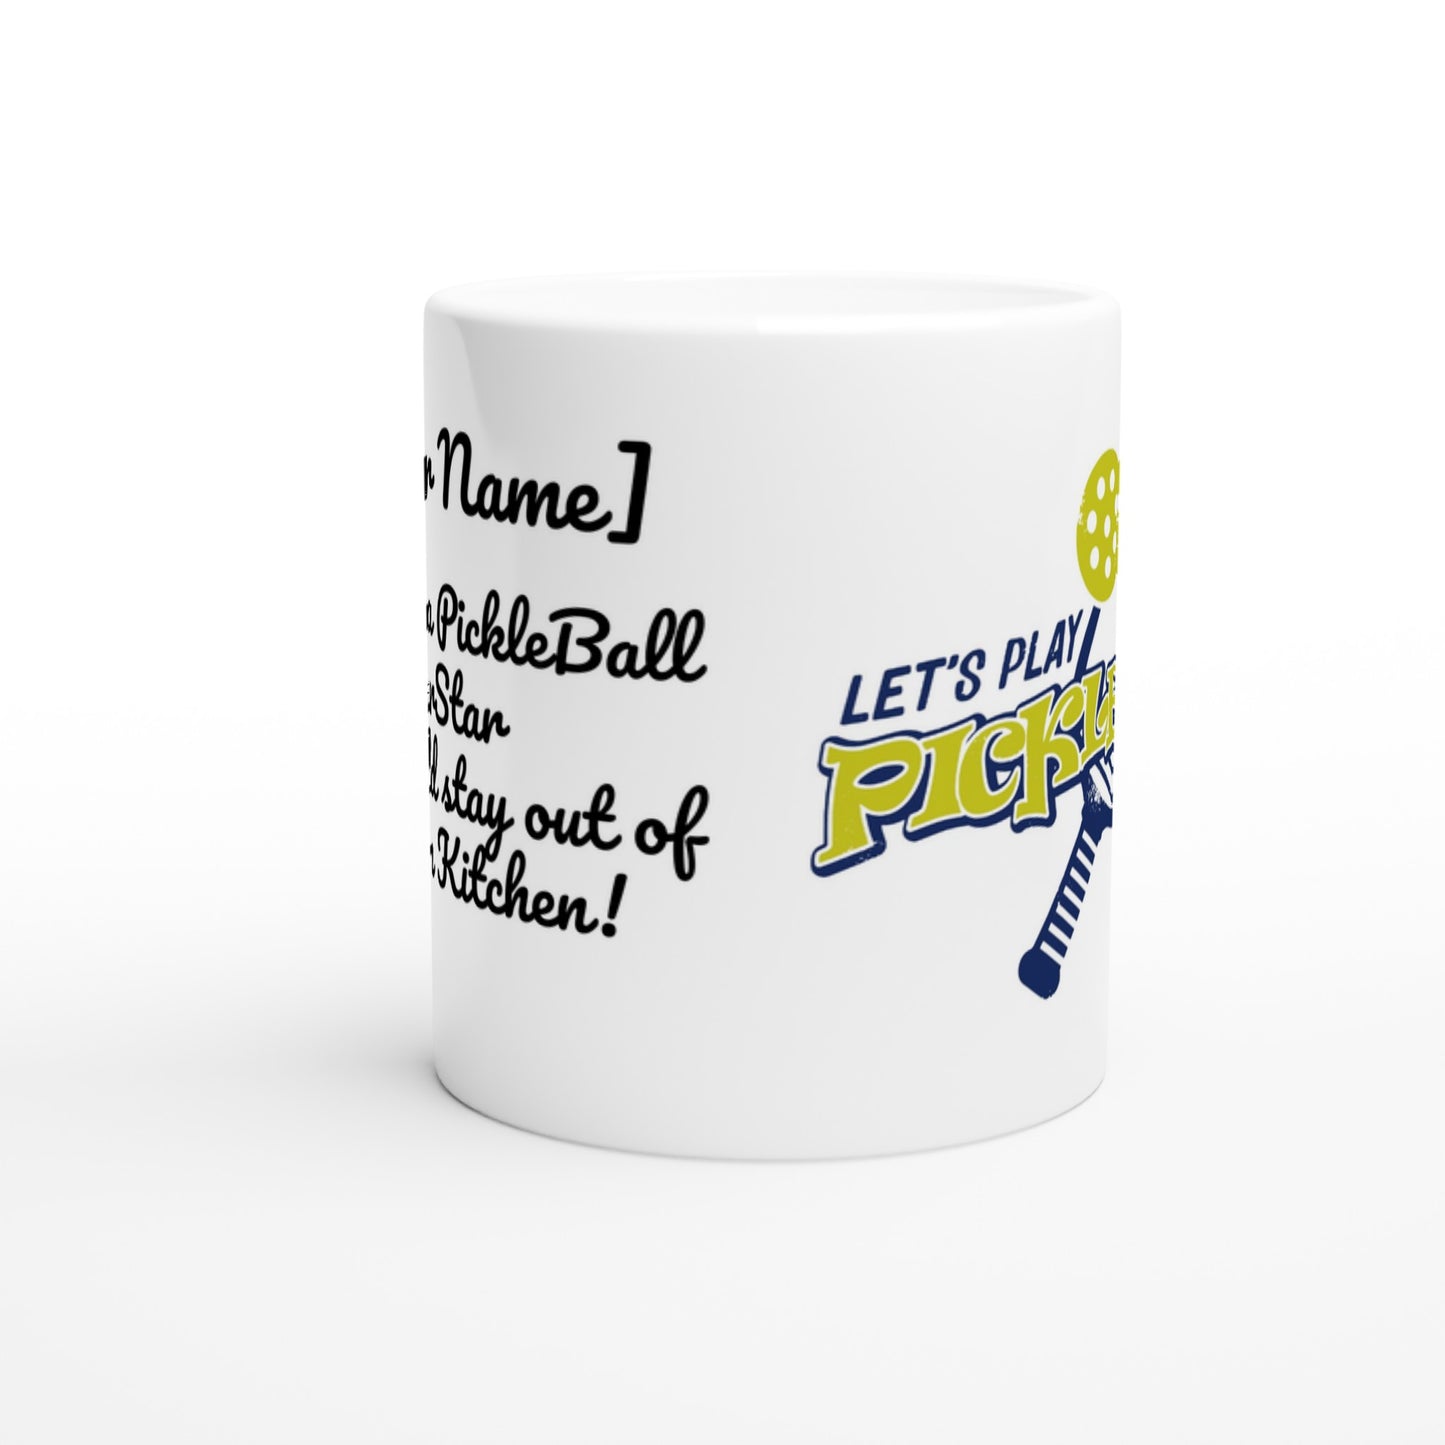 Personalized white ceramic 11oz mug with front motto Your Name Would be a PickleBall Superstar if they could stay out of the Darn Kitchen on front and Let's Play PickleBall logo on back coffee mug dishwasher and microwave safe from WhatYa Say Apparel side view.